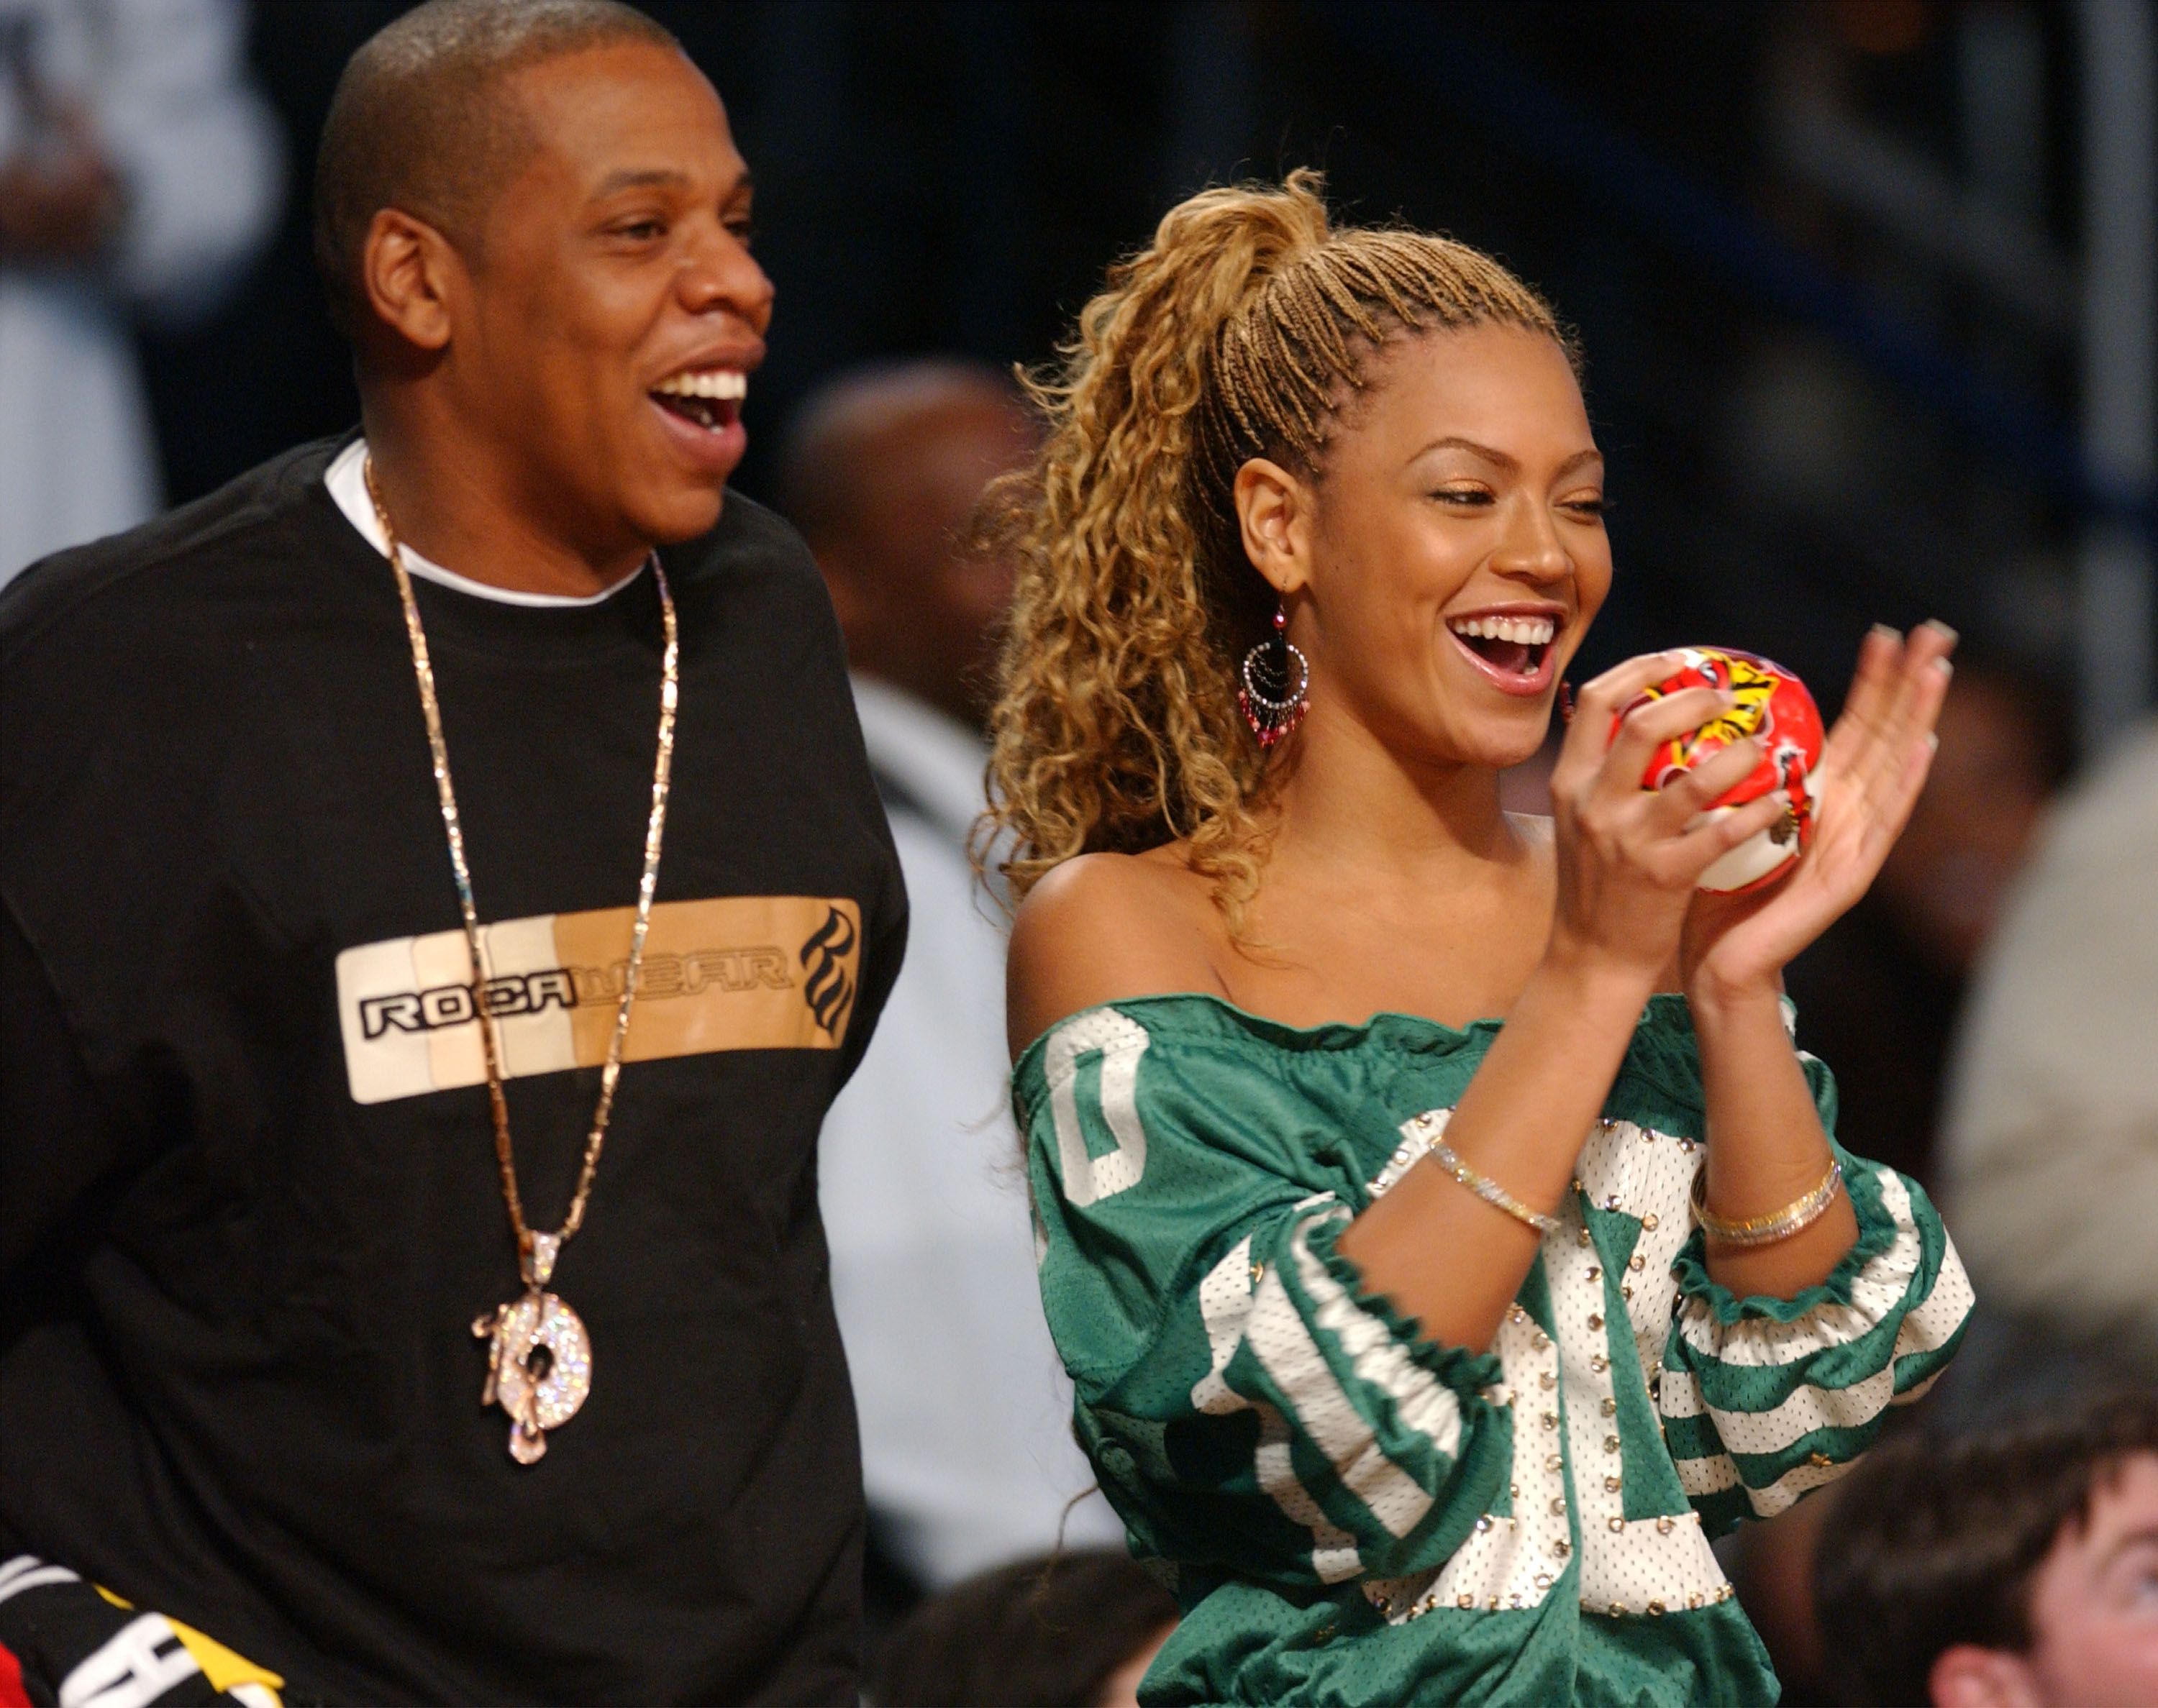 Here's how badly Jay Z wanted to sign a bashful 16-year-old Rihanna to a  record deal